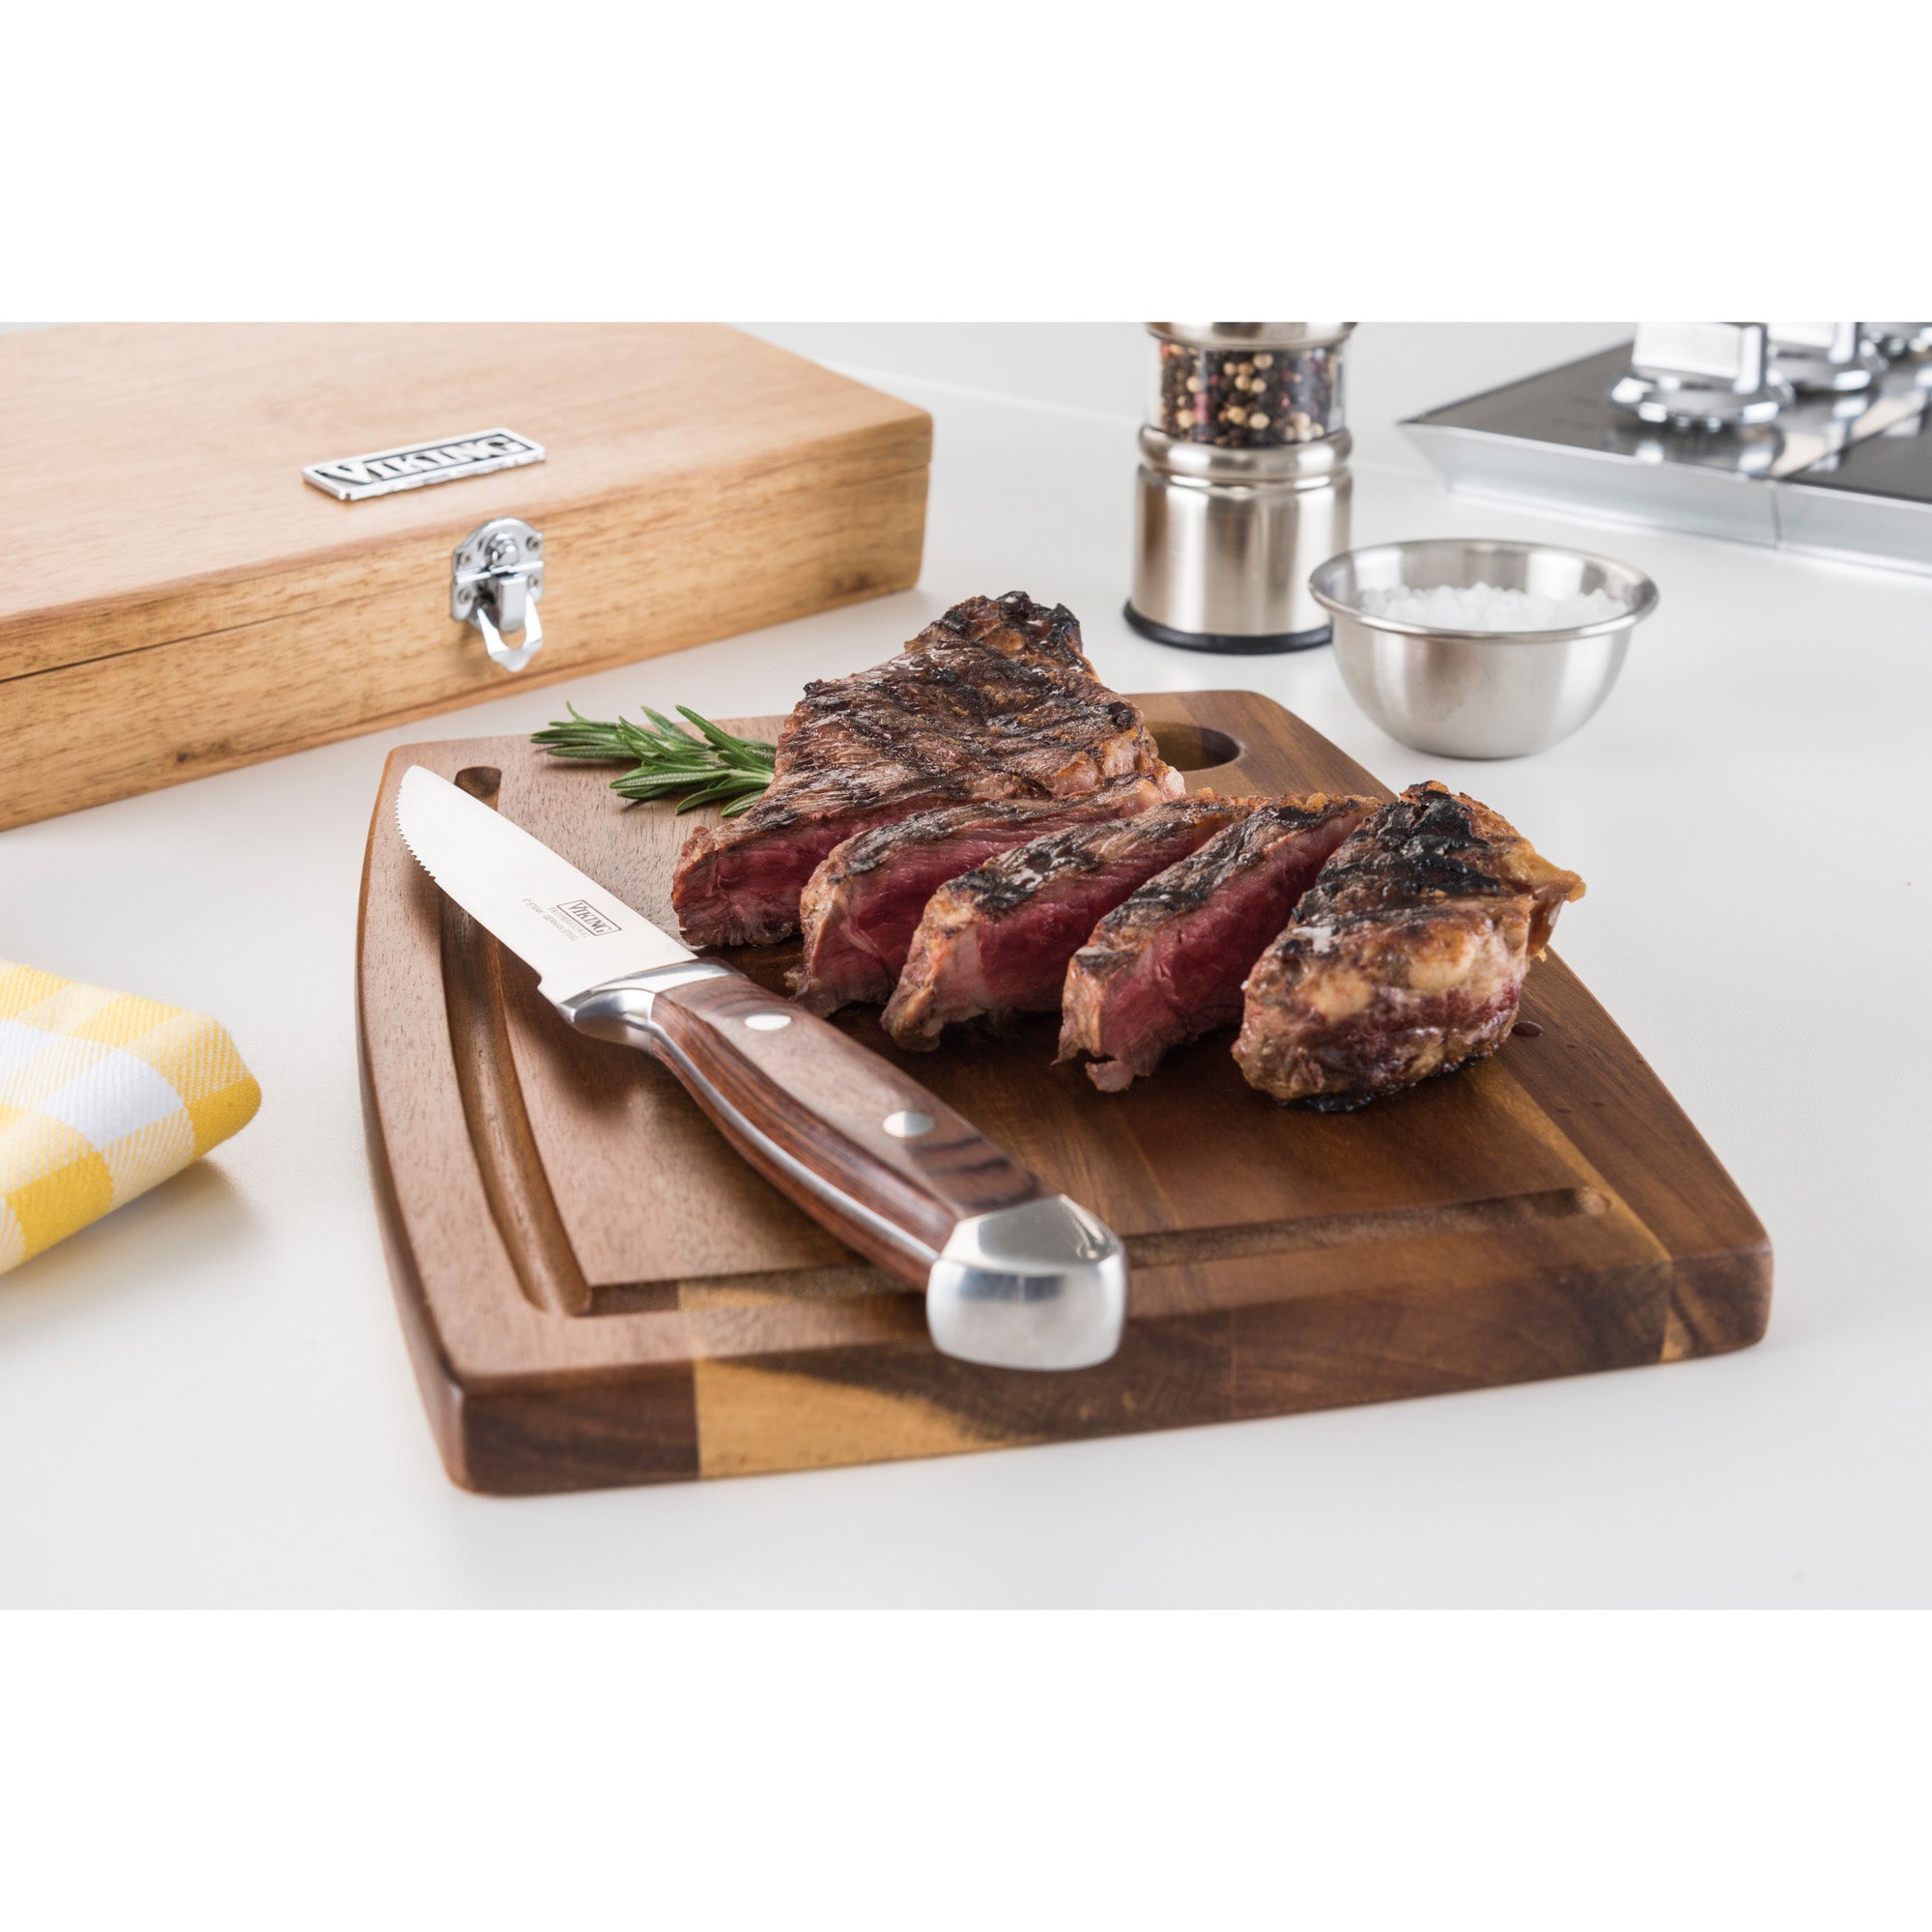 Viking Culinary German Stainless Steel Pakkawood Steak Knife Set, 6 Piece,  Includes Wooden Gift Box, Handwash Only, Water & Stain Resistant Handles